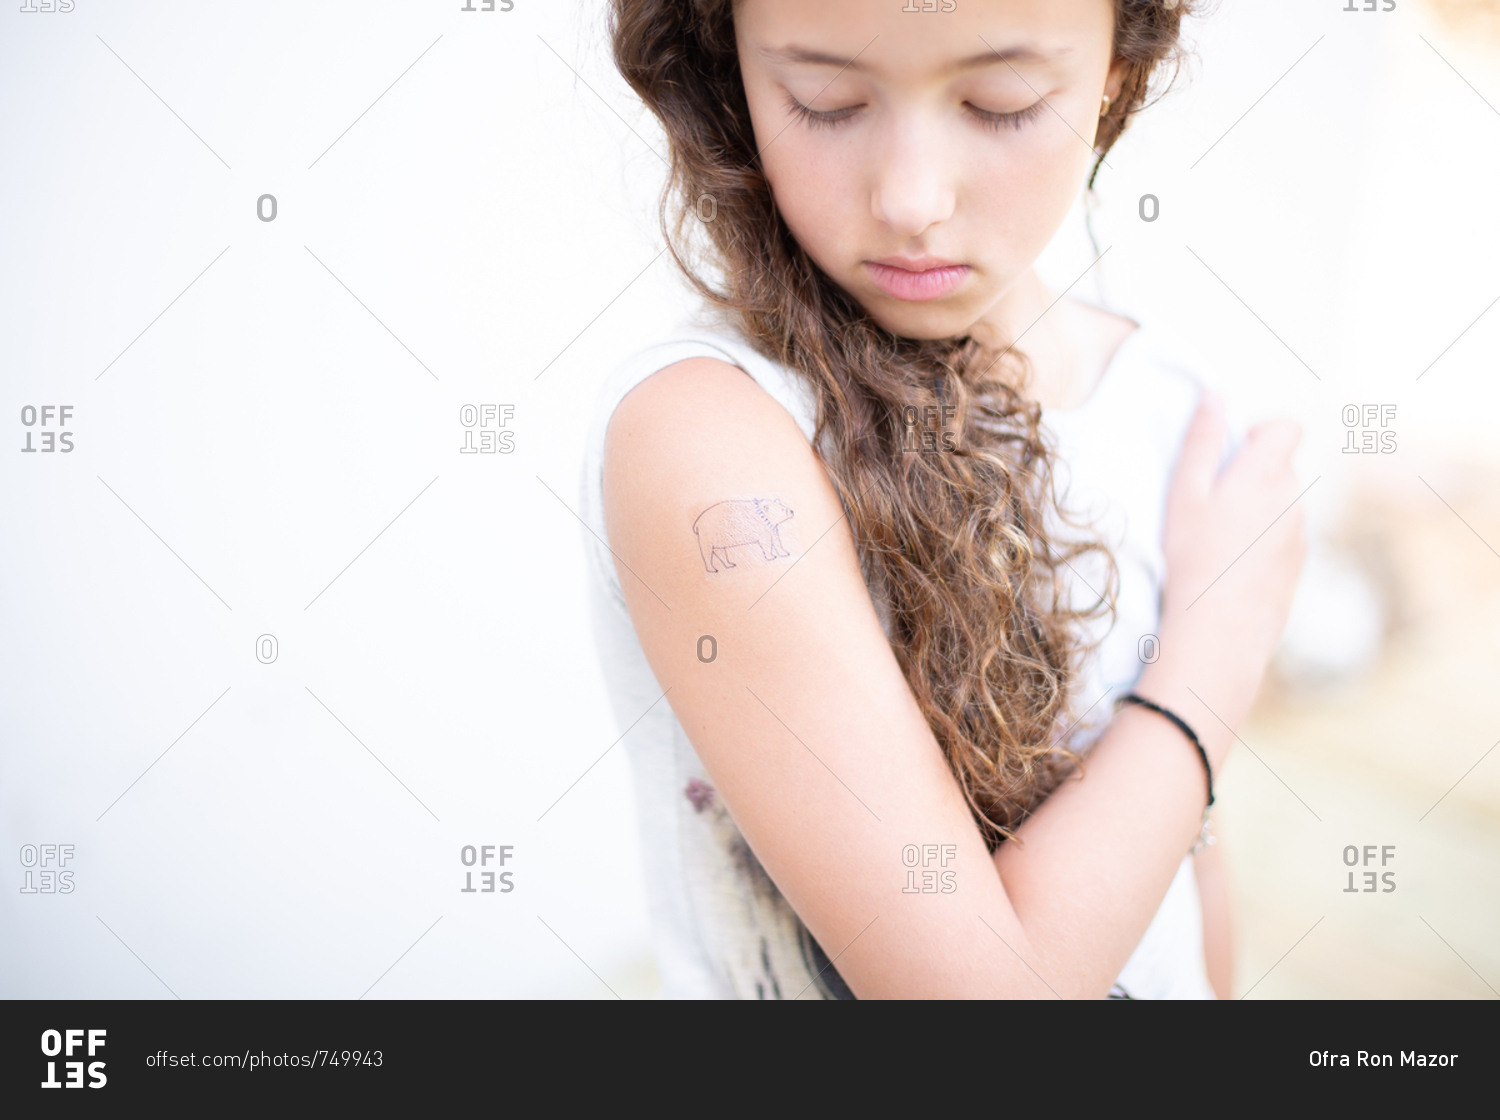 Young girl looking at a temporary tattoo on her forearm